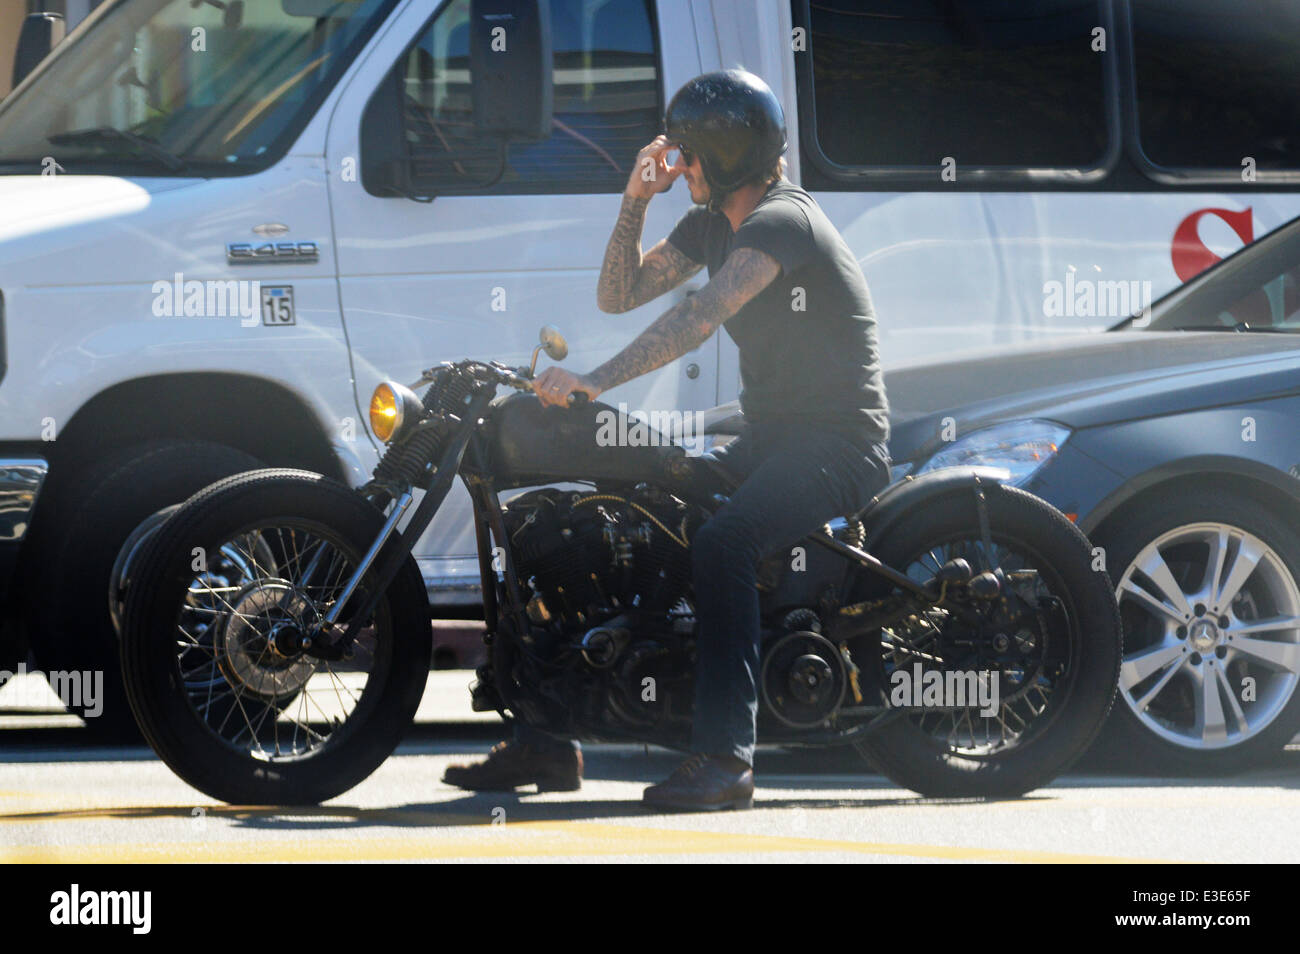 David Beckham Riding His Custom Built 93 Knucklehead Motorbike In West Hollywood Wearing No Protective Leathers Featuring David Beckham Where Los Angeles Ca United States When 16 Oct 2013 Stock Photo Alamy